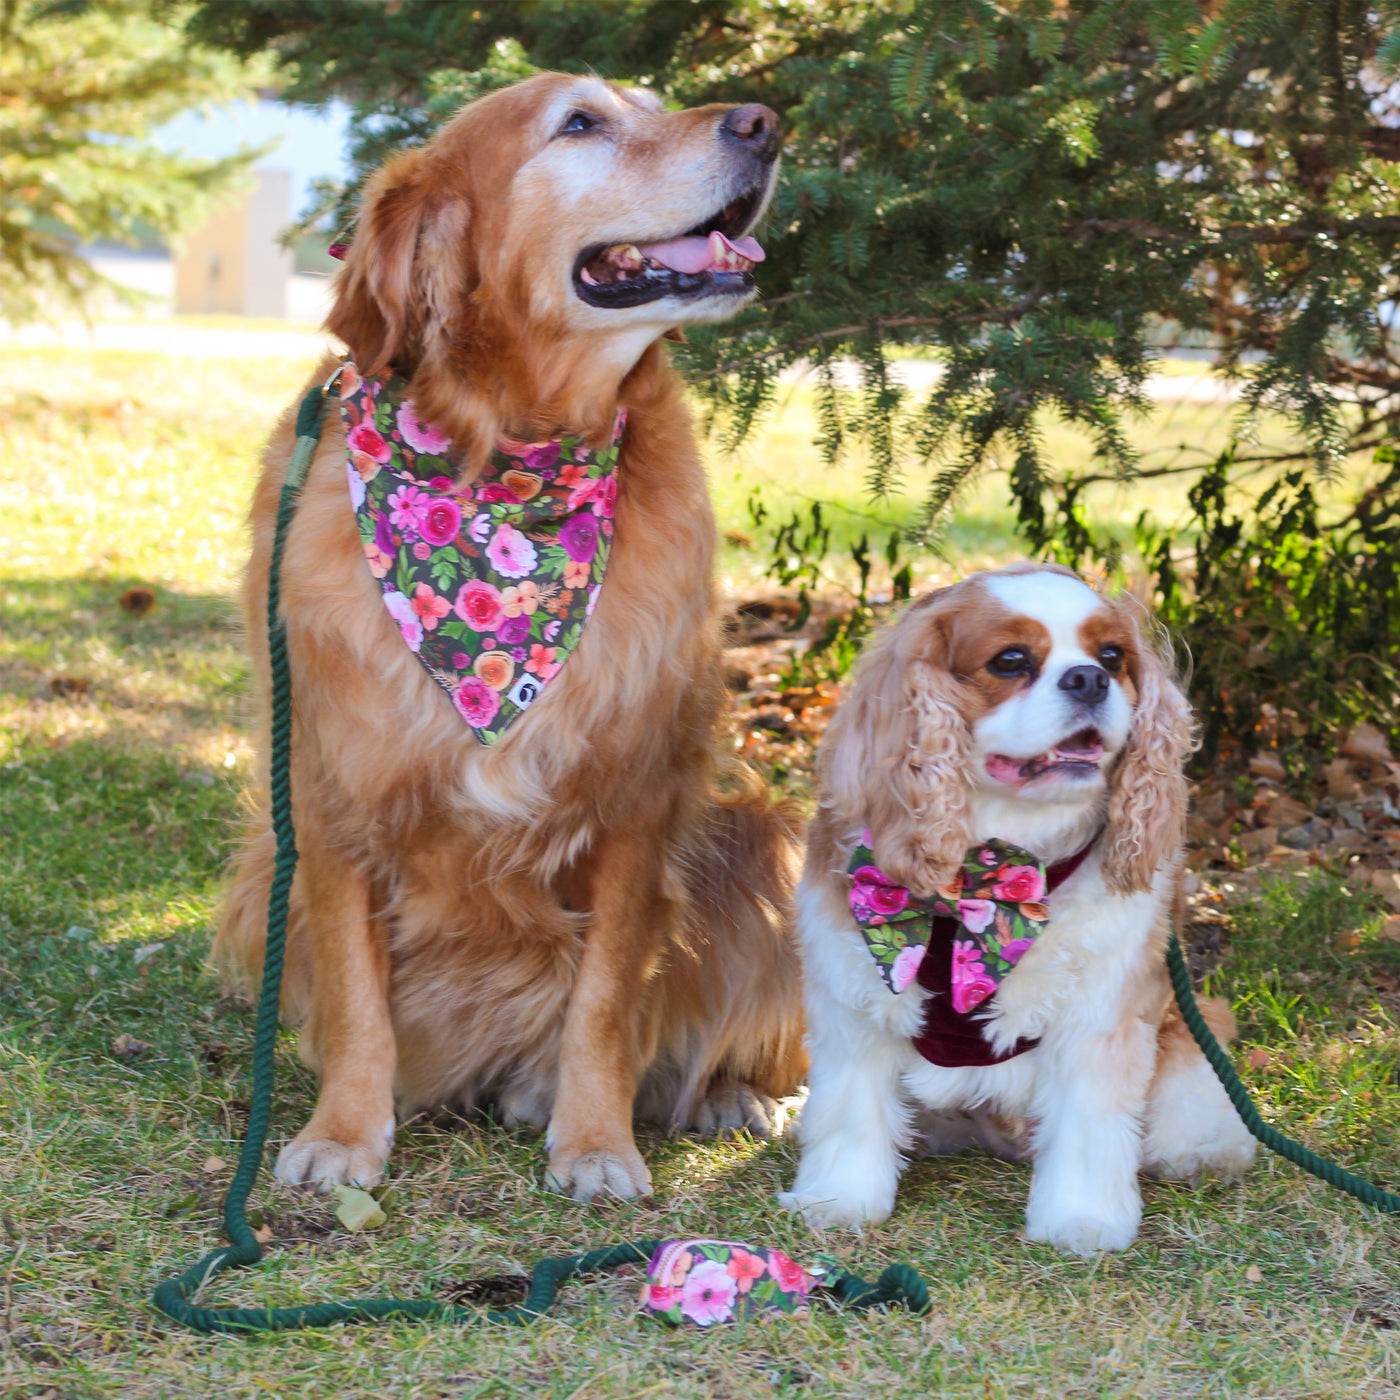 Golden retriever wearing floral print dog bandana and cavalier king charles spaniel wearing wine velvet dog harness and floral dog bow both with green rope dog leashes and floral dog poop bag holder